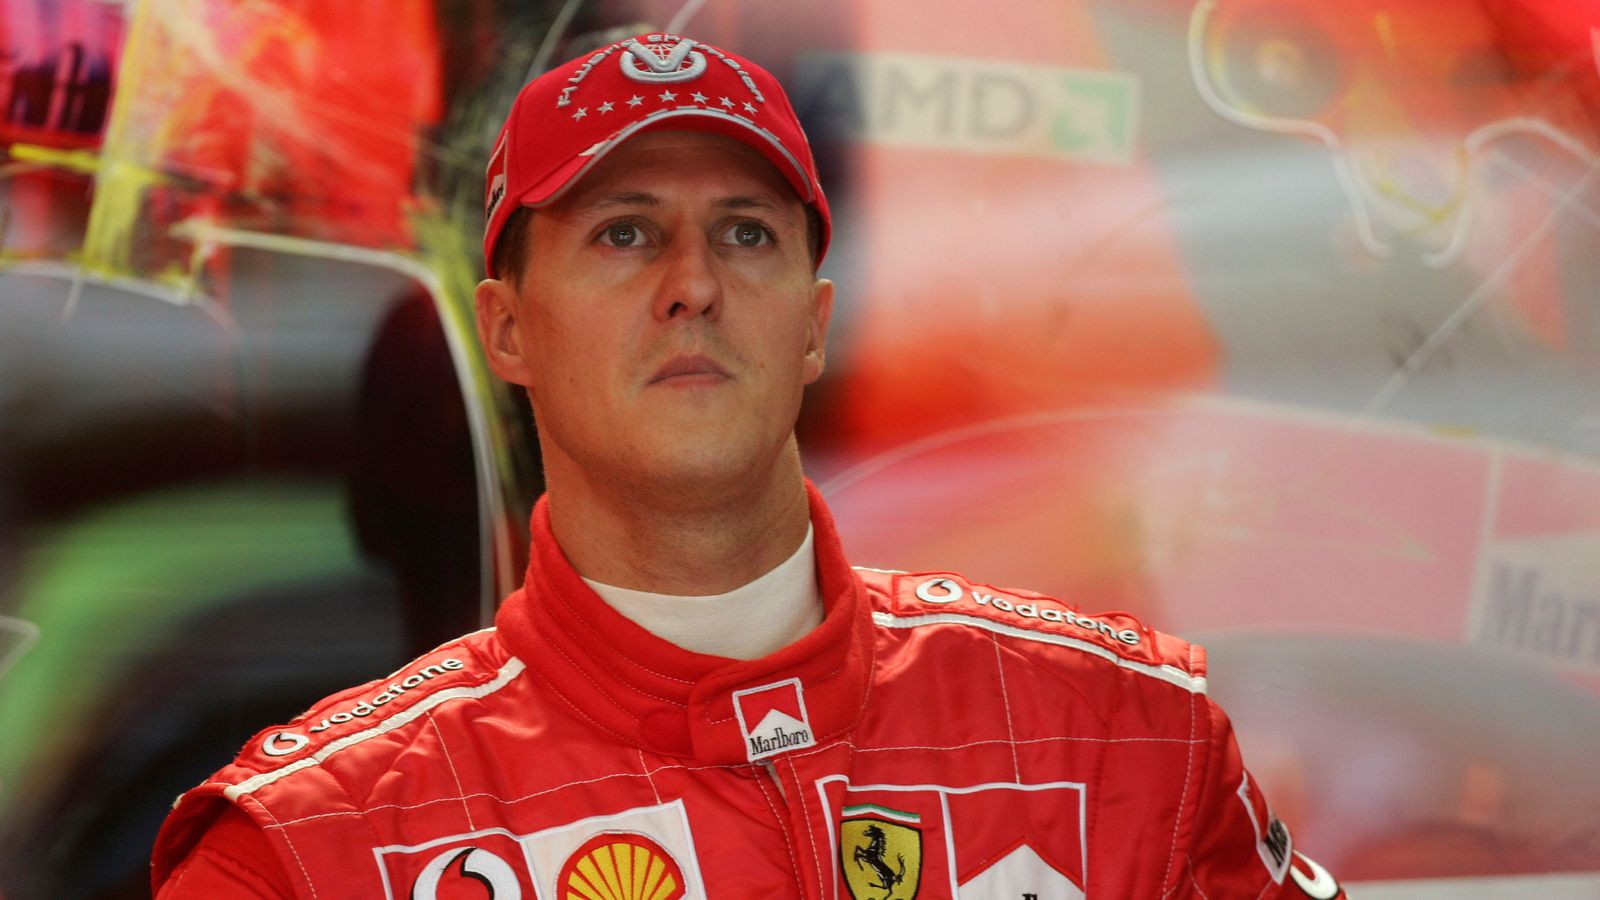 Michael Schumacher: Arrests made over plot to blackmail F1 legend’s family